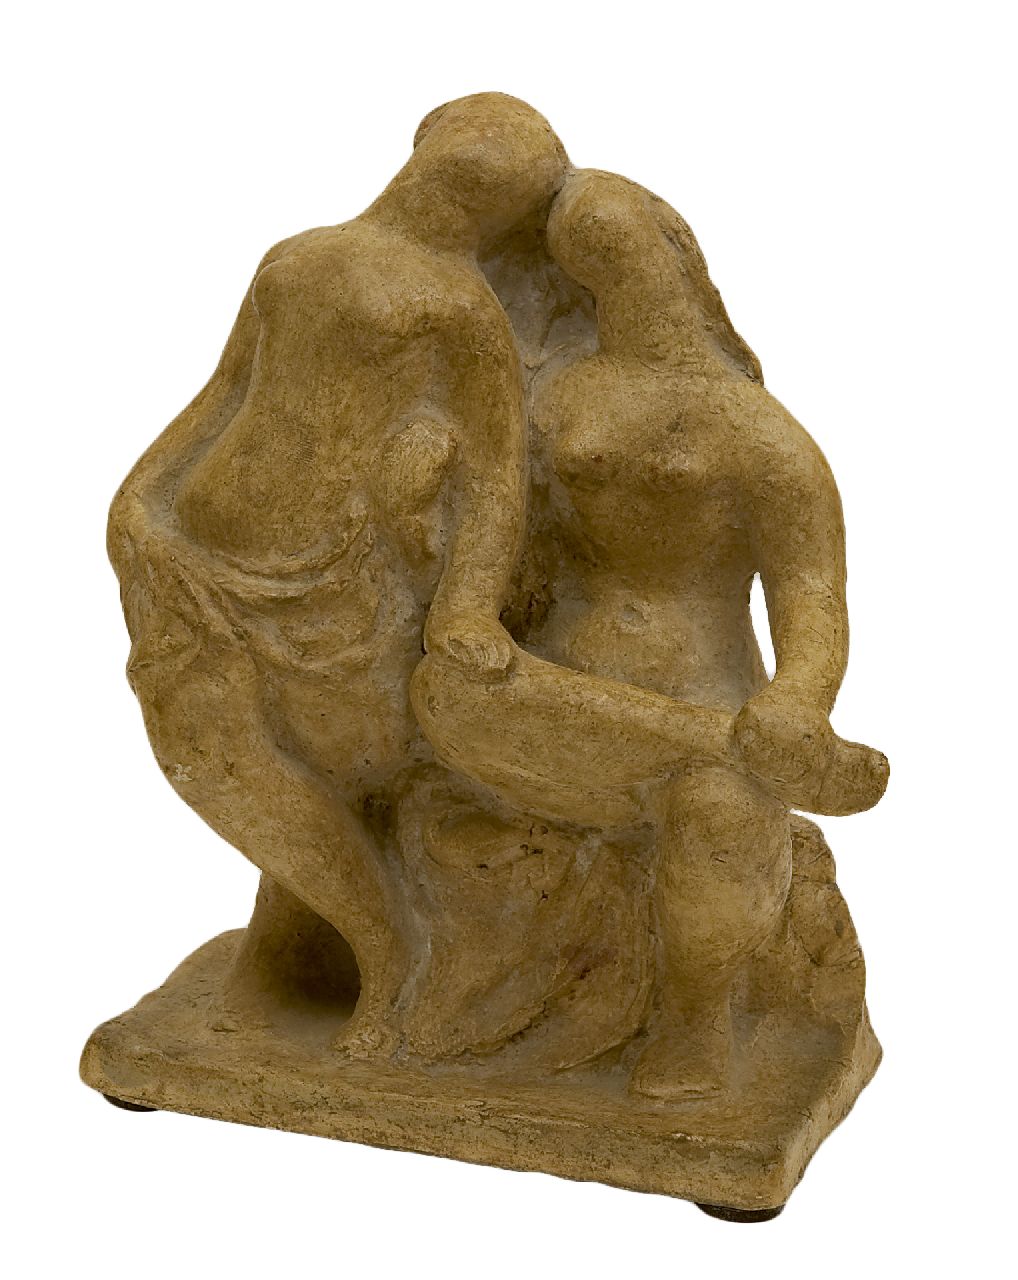 Pallandt Ch.D. van | Charlotte Dorothée van Pallandt | Sculptures and objects offered for sale | The girlfriends, plaster with a patina 22.1 x 18.0 cm, signed on the backside of the base and executed 1941